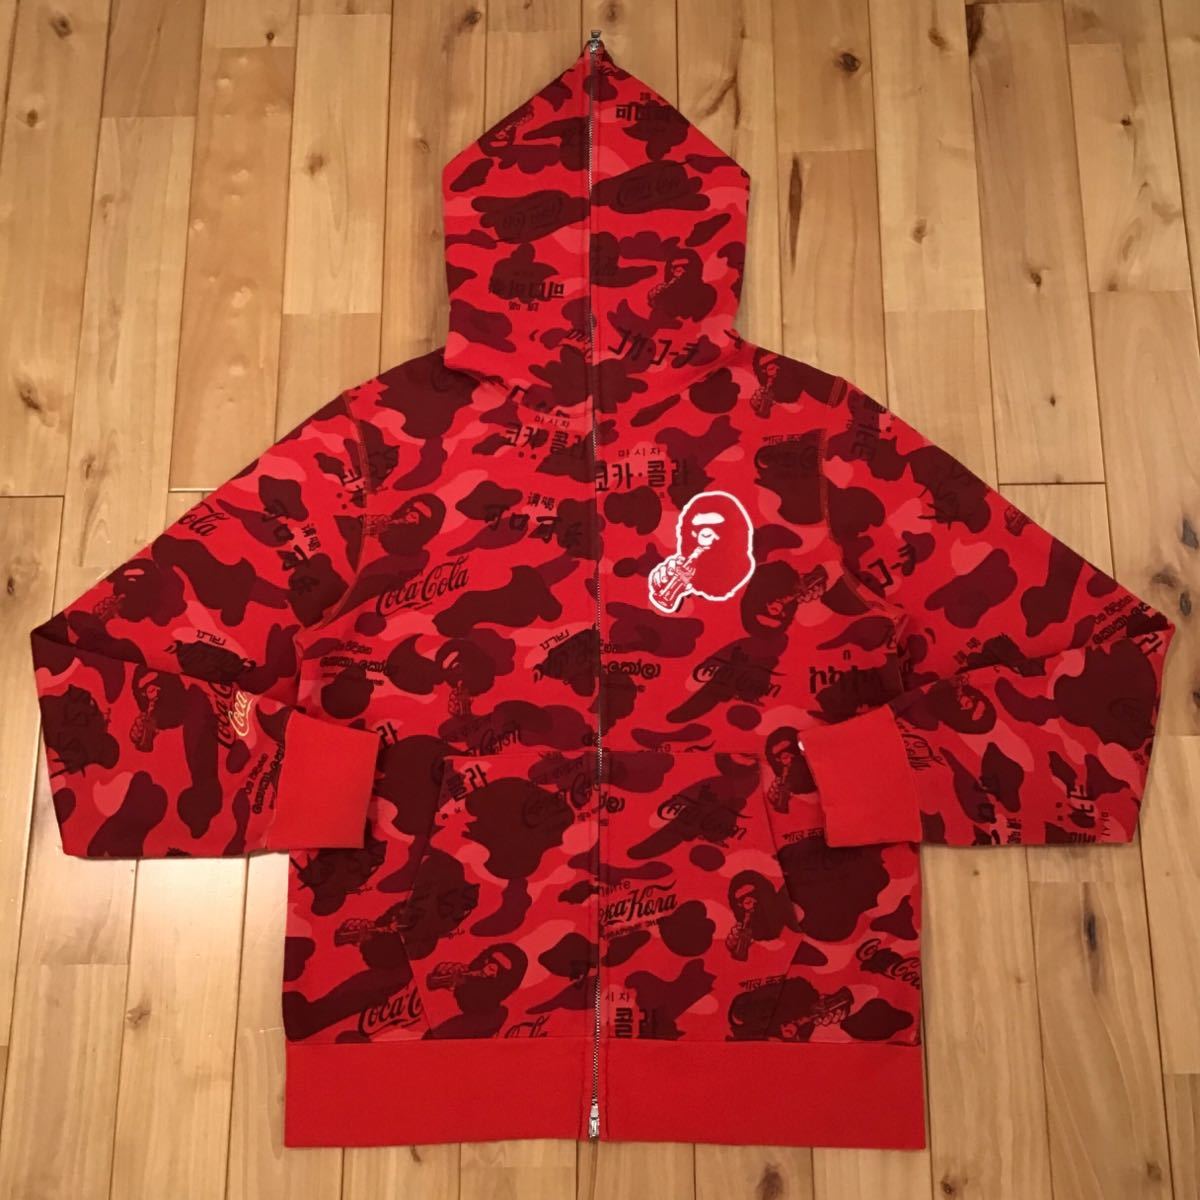 Coca cola Red camo フルジップ パーカー Lサイズ BAPE full zip hoodie a bathing ape エイプ  ベイプ アベイシングエイプ コカコーラ c62 product details | Yahoo! Auctions Japan proxy  bidding and shopping service | FROM